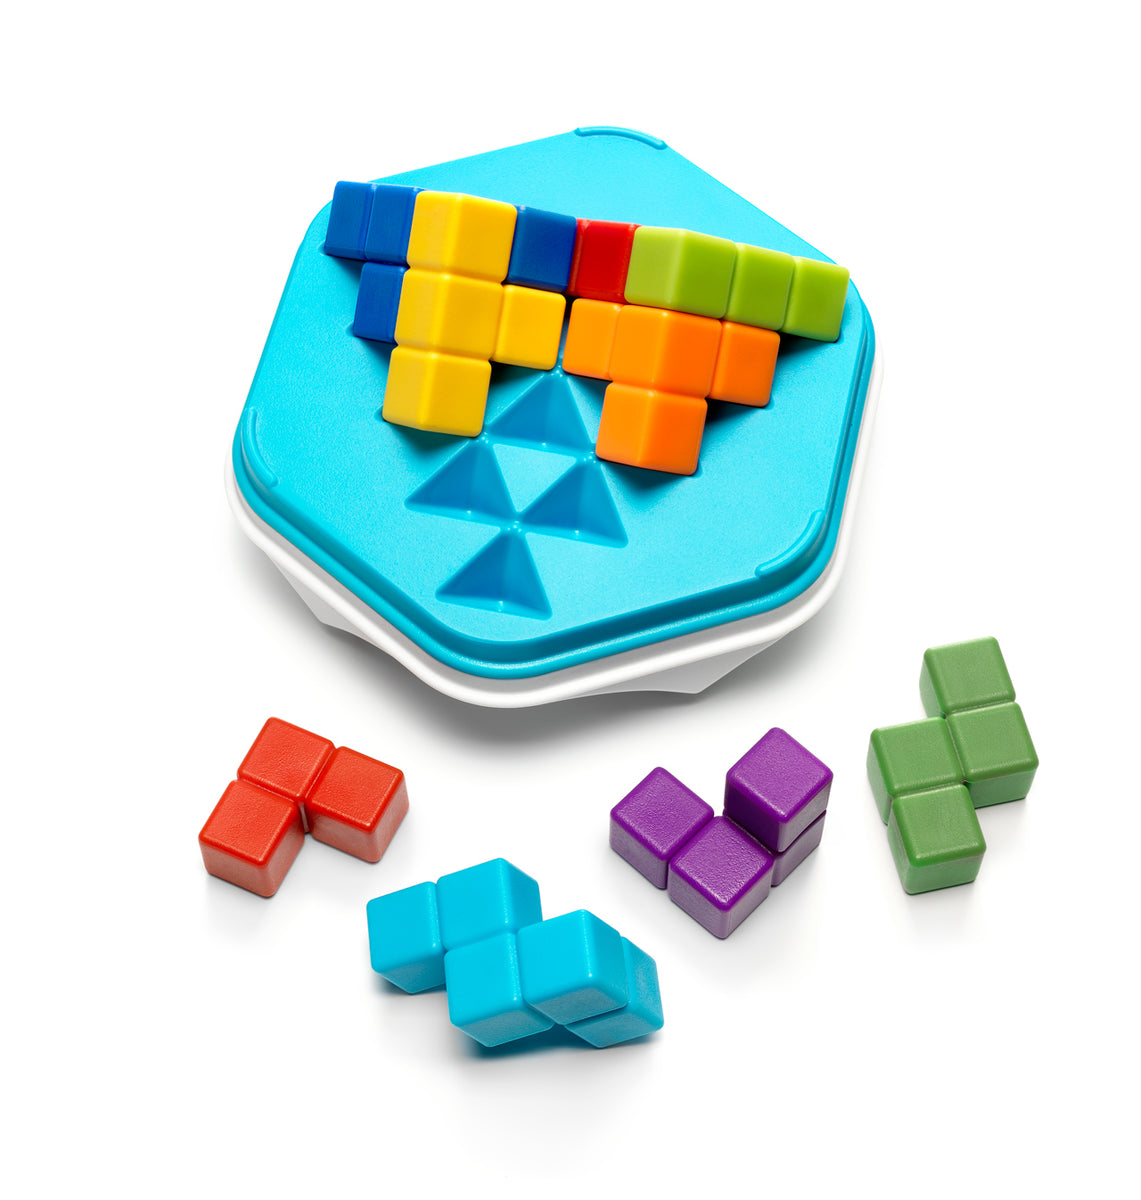 SmartGames: Educational Puzzle fun for the whole family